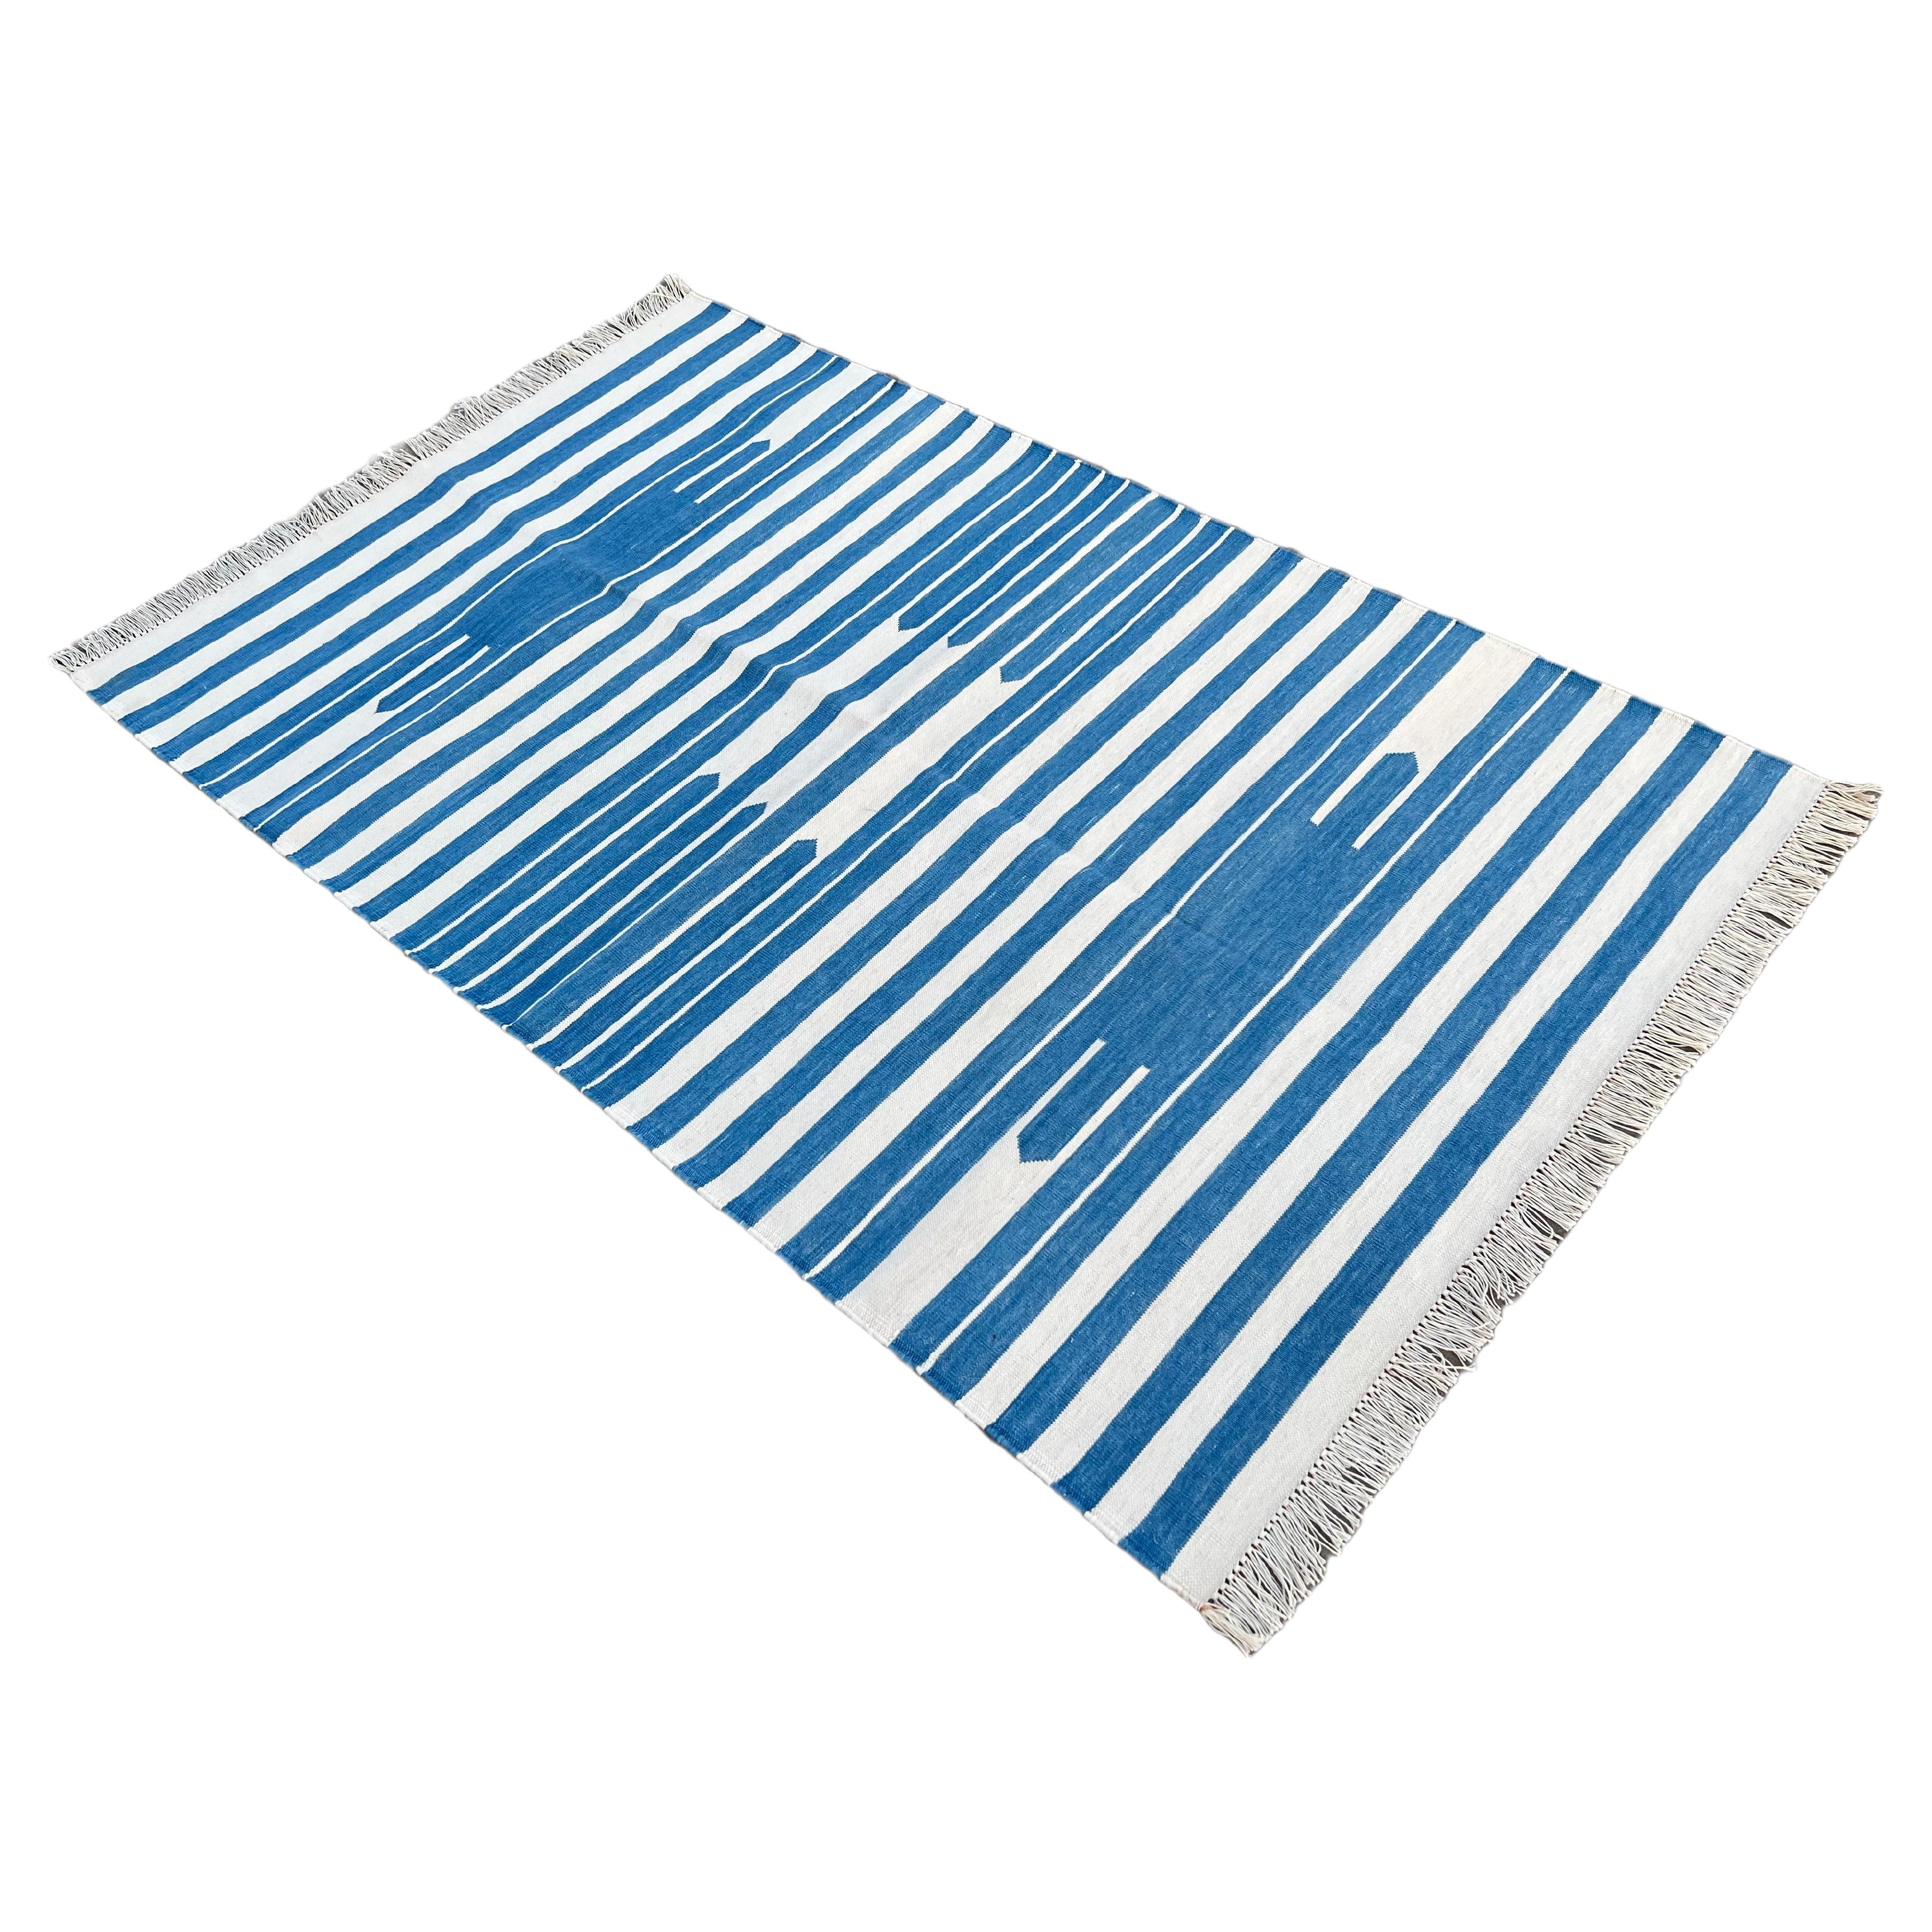 Handmade Cotton Area Flat Weave Rug, 3'x5' Blue And White Striped Indian Dhurrie